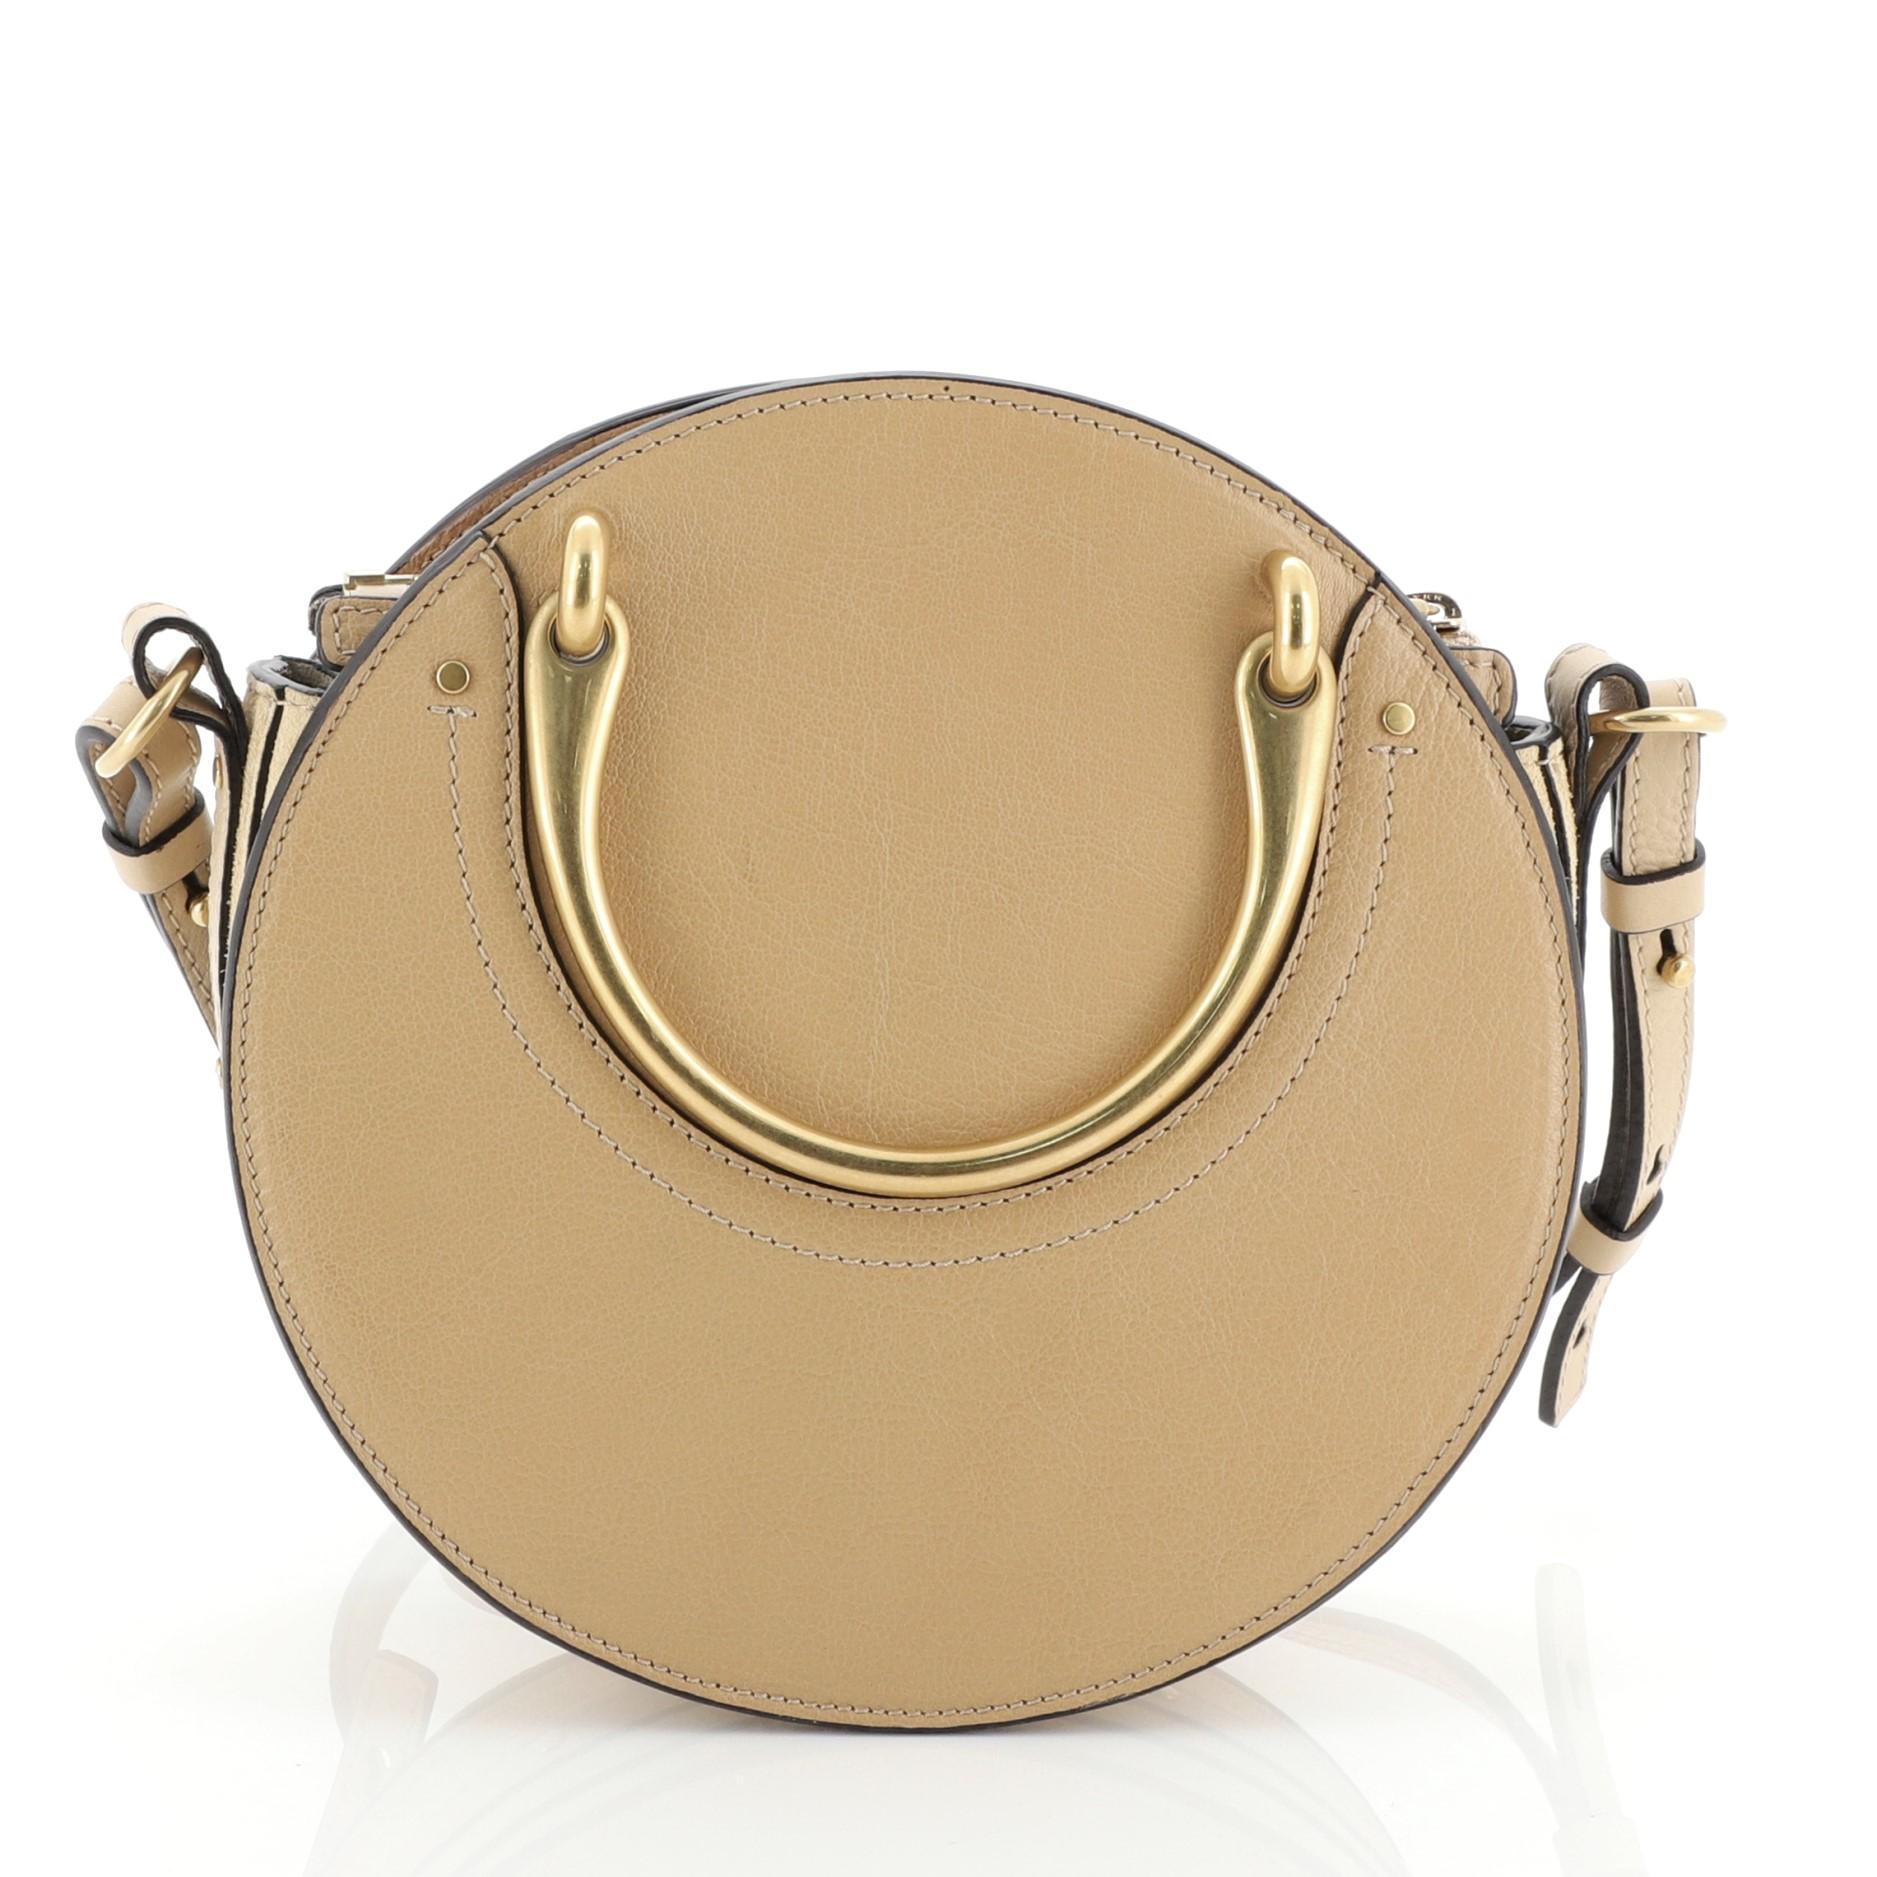 Beige Chloe Pixie Crossbody Bag Leather and Suede Small